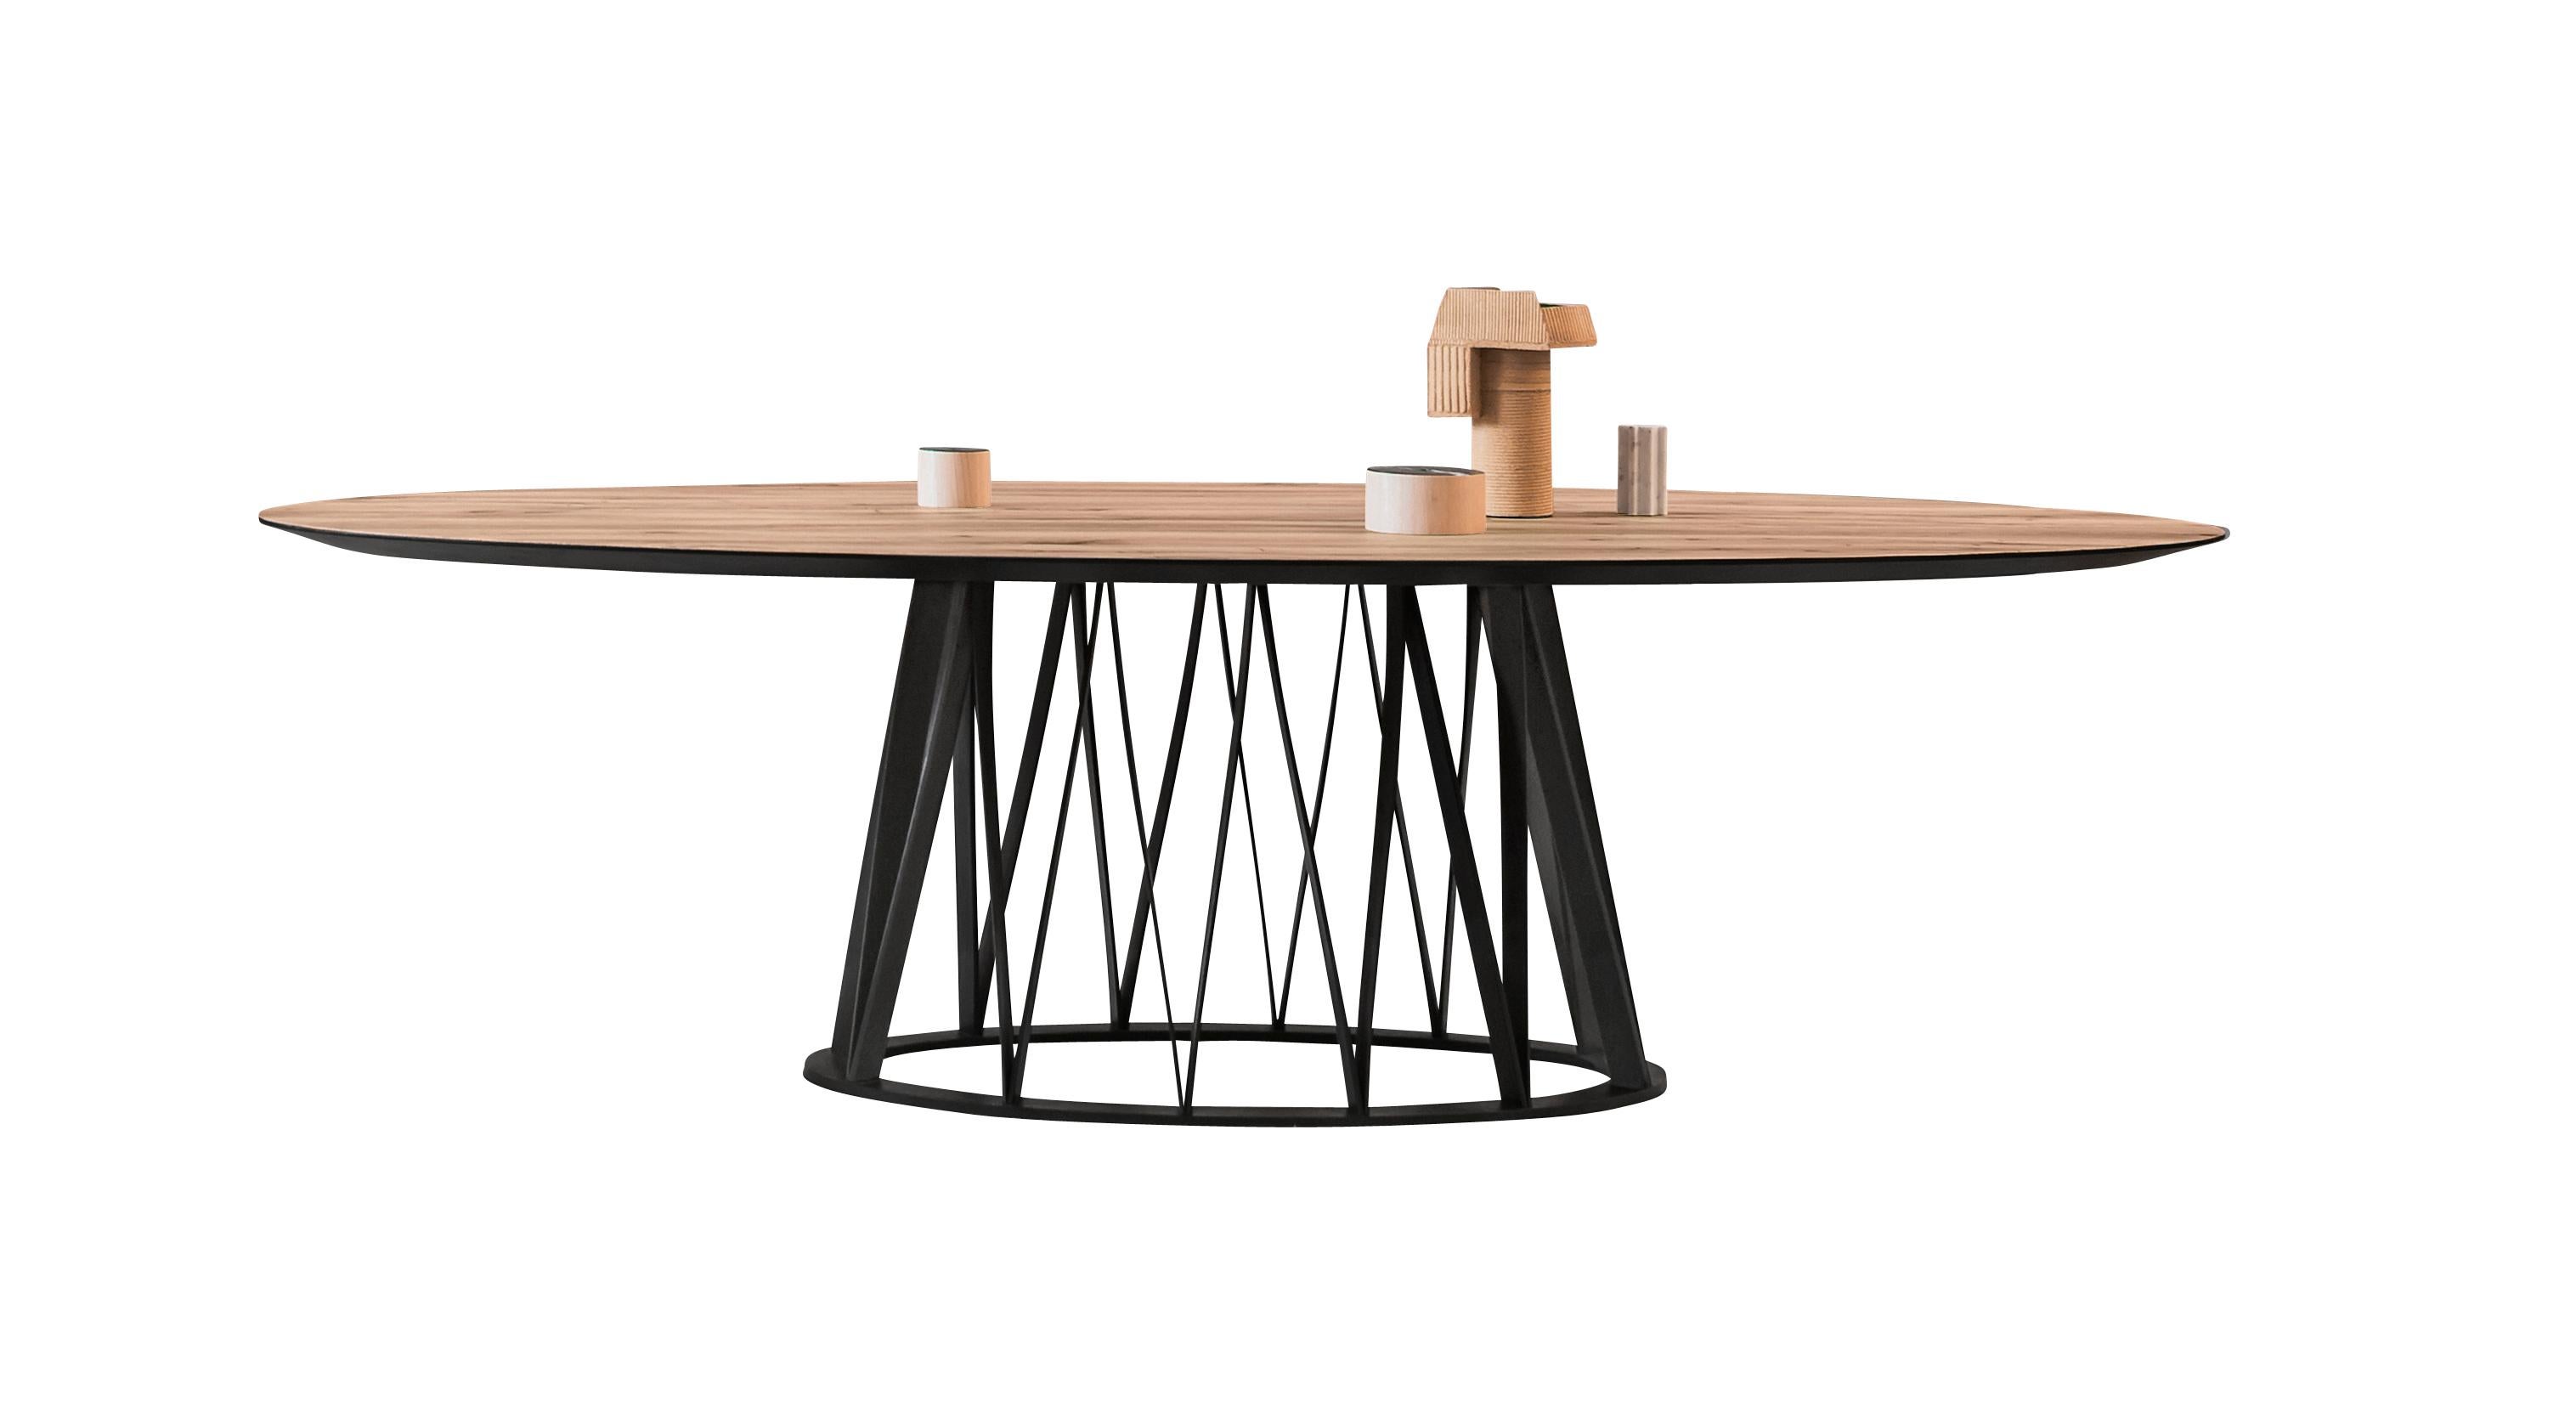 Acco table is available with a wooden or ceramic top. The wooden base is offered here in black ash, however, available for custom orders in natural oak or Canaletto walnut. Here you are shown the Acco large dining table in black ash base Finish and